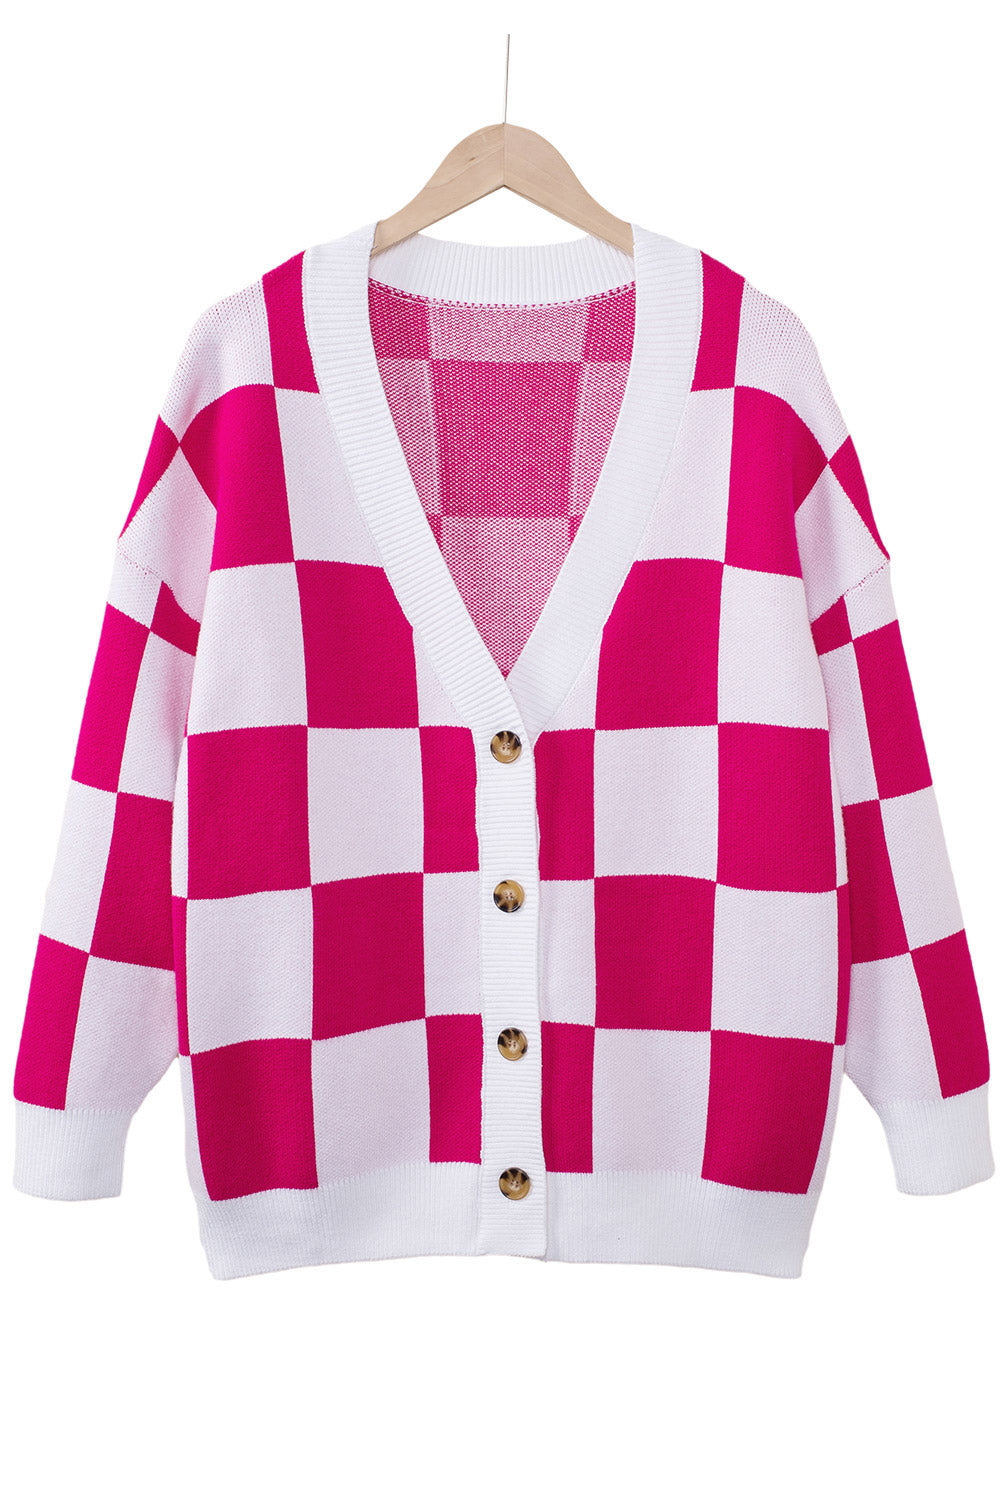 LC271943-P6-S, LC271943-P6-M, LC271943-P6-L, LC271943-P6-XL, LC271943-P6-2XL, Rose Red Contrast Checkered Print Button Up Sweater Cardigan 